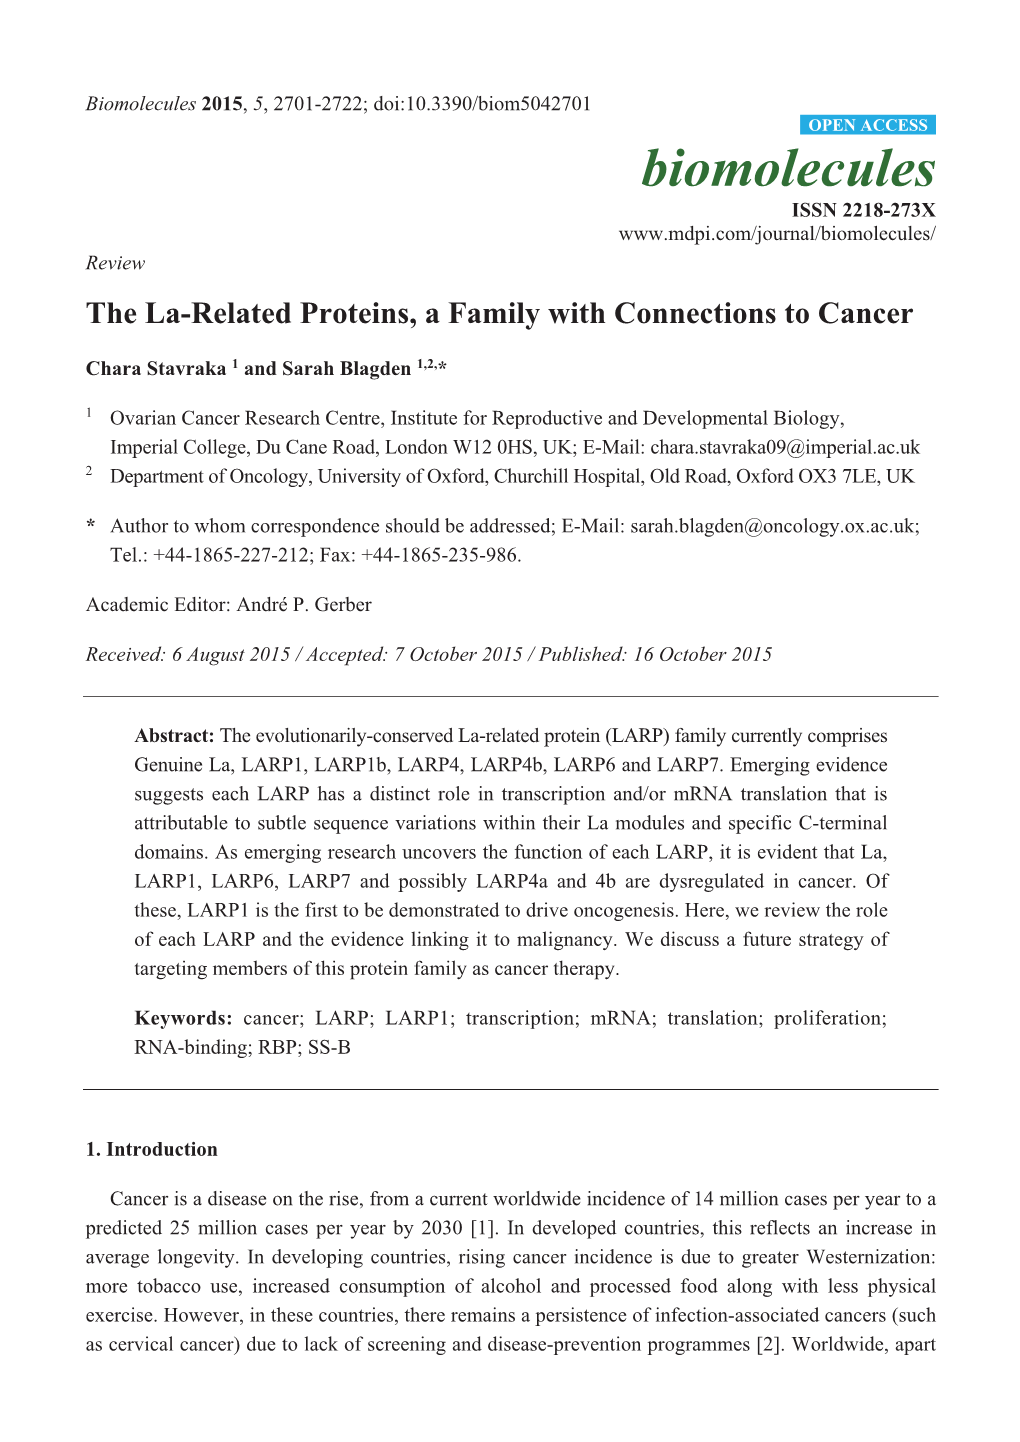 The La-Related Proteins, a Family with Connections to Cancer